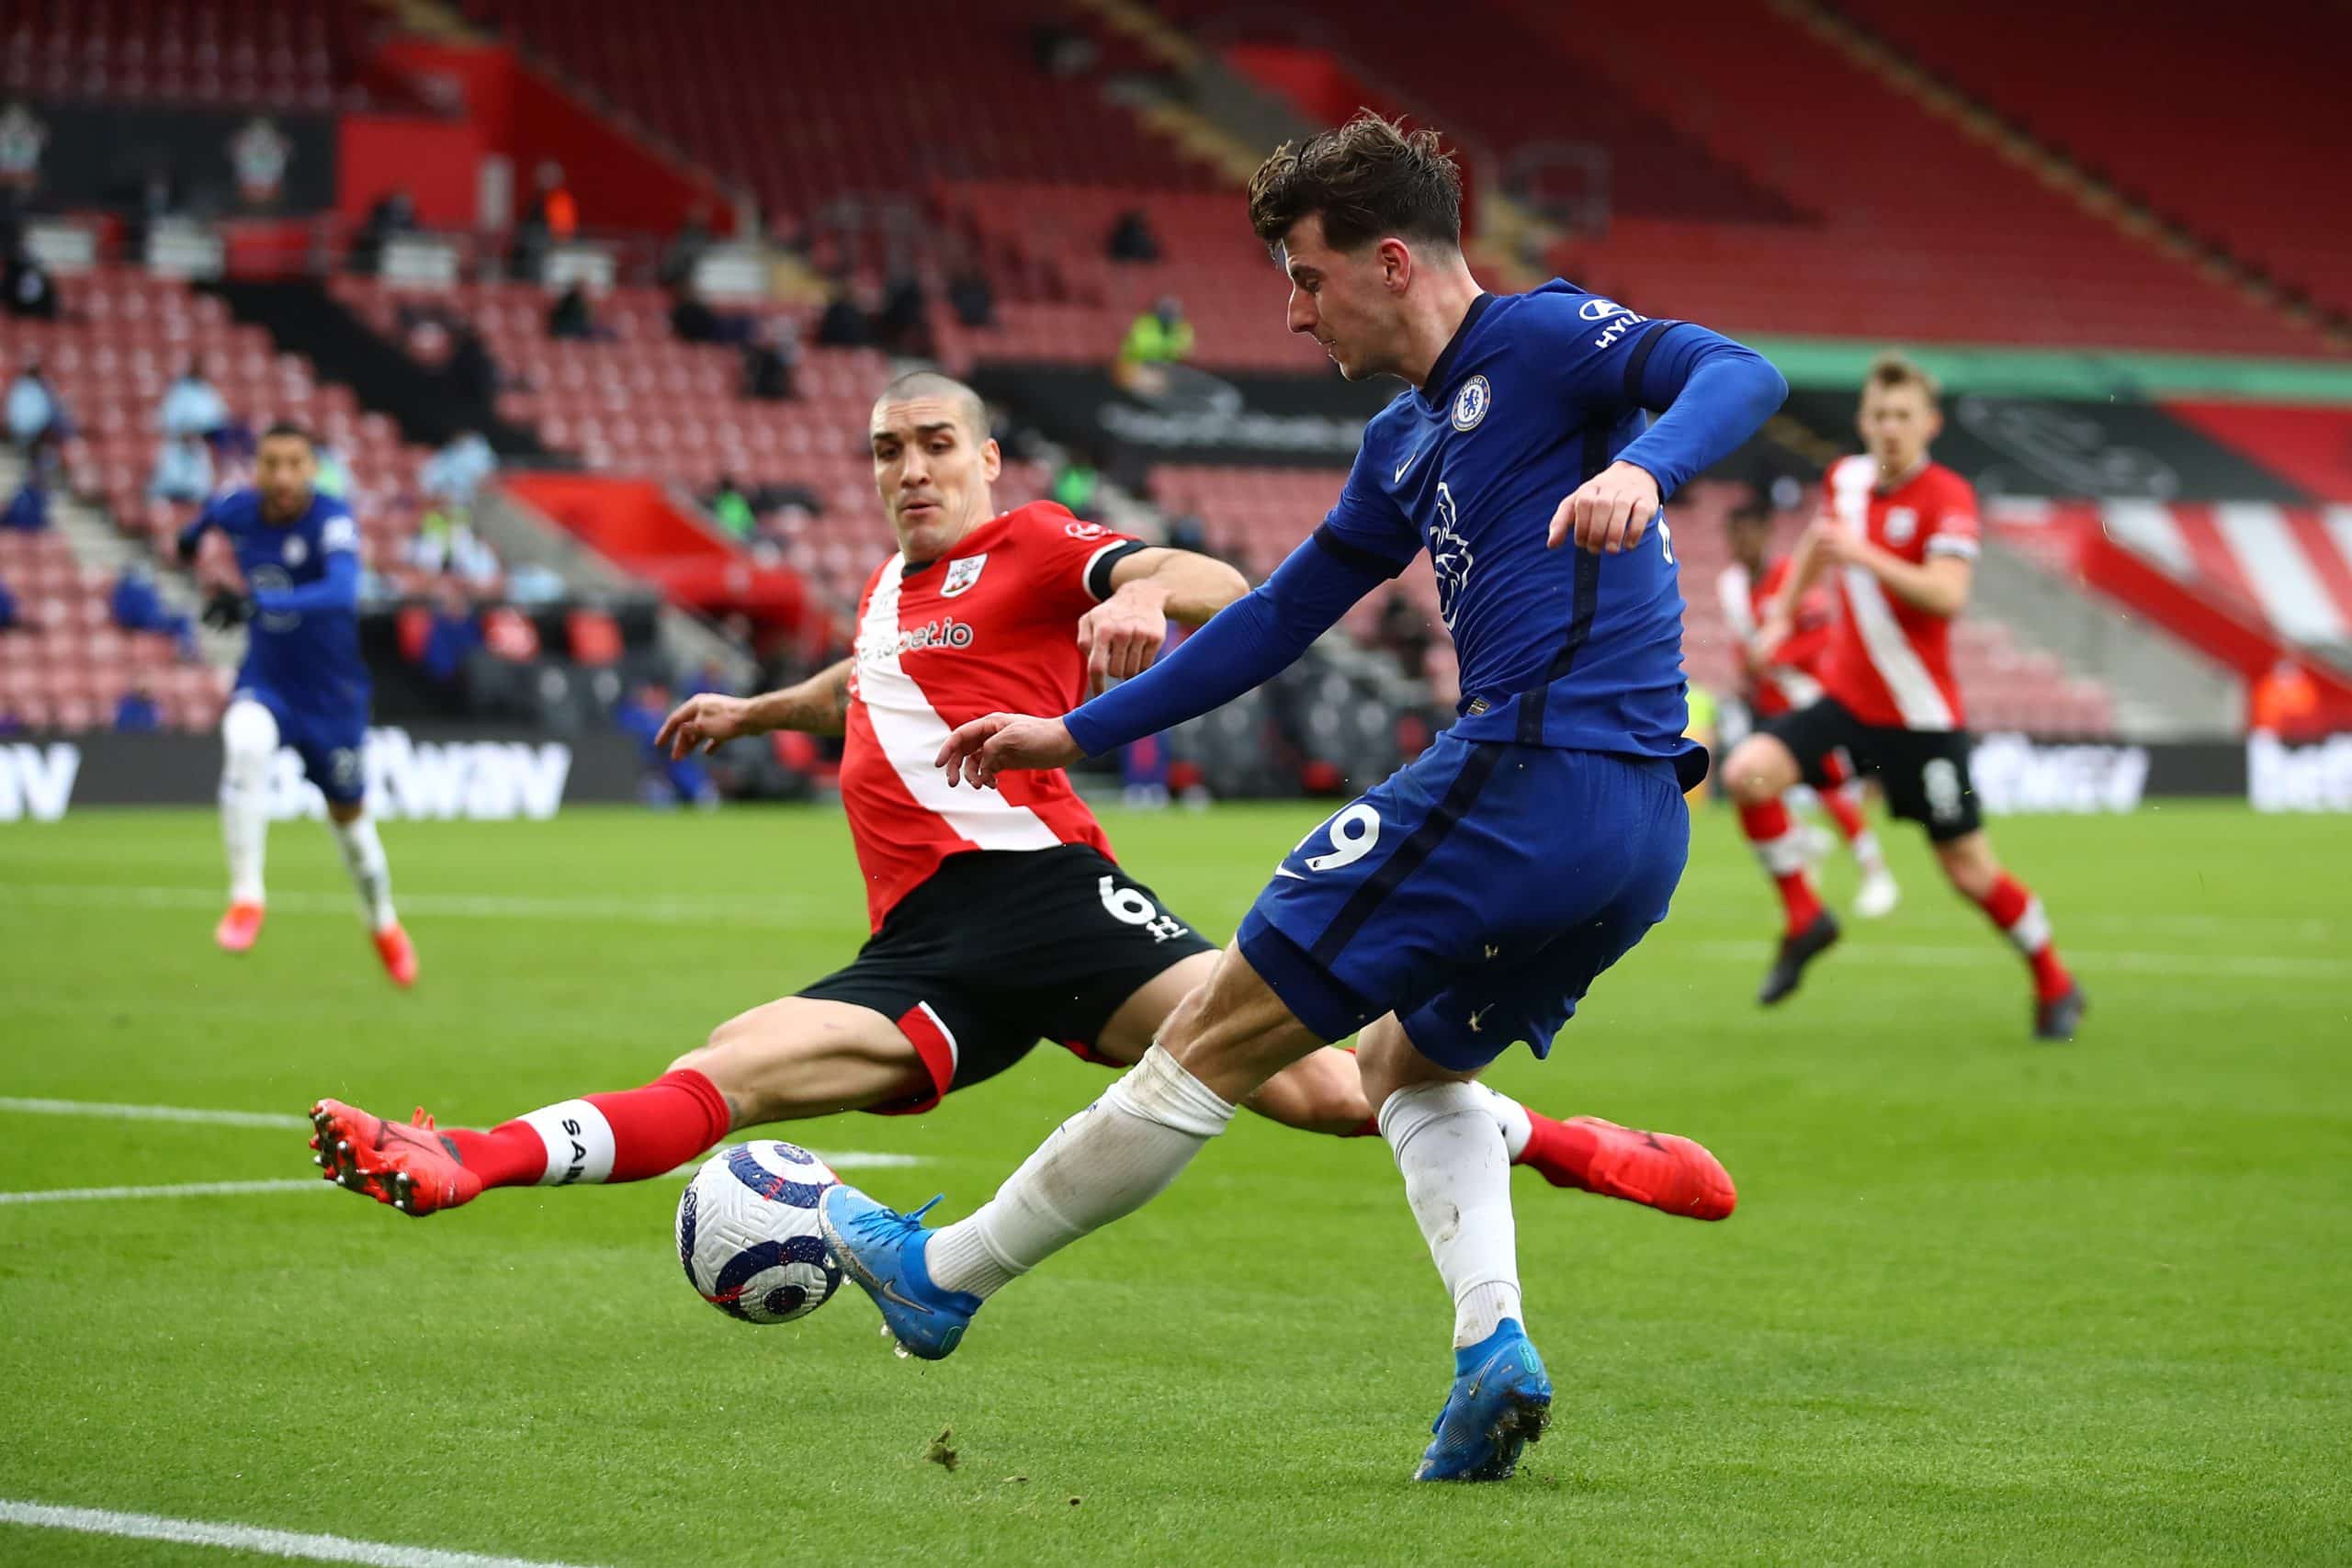 You are currently viewing Highlights: Mount helps Chelsea draw at Southampton